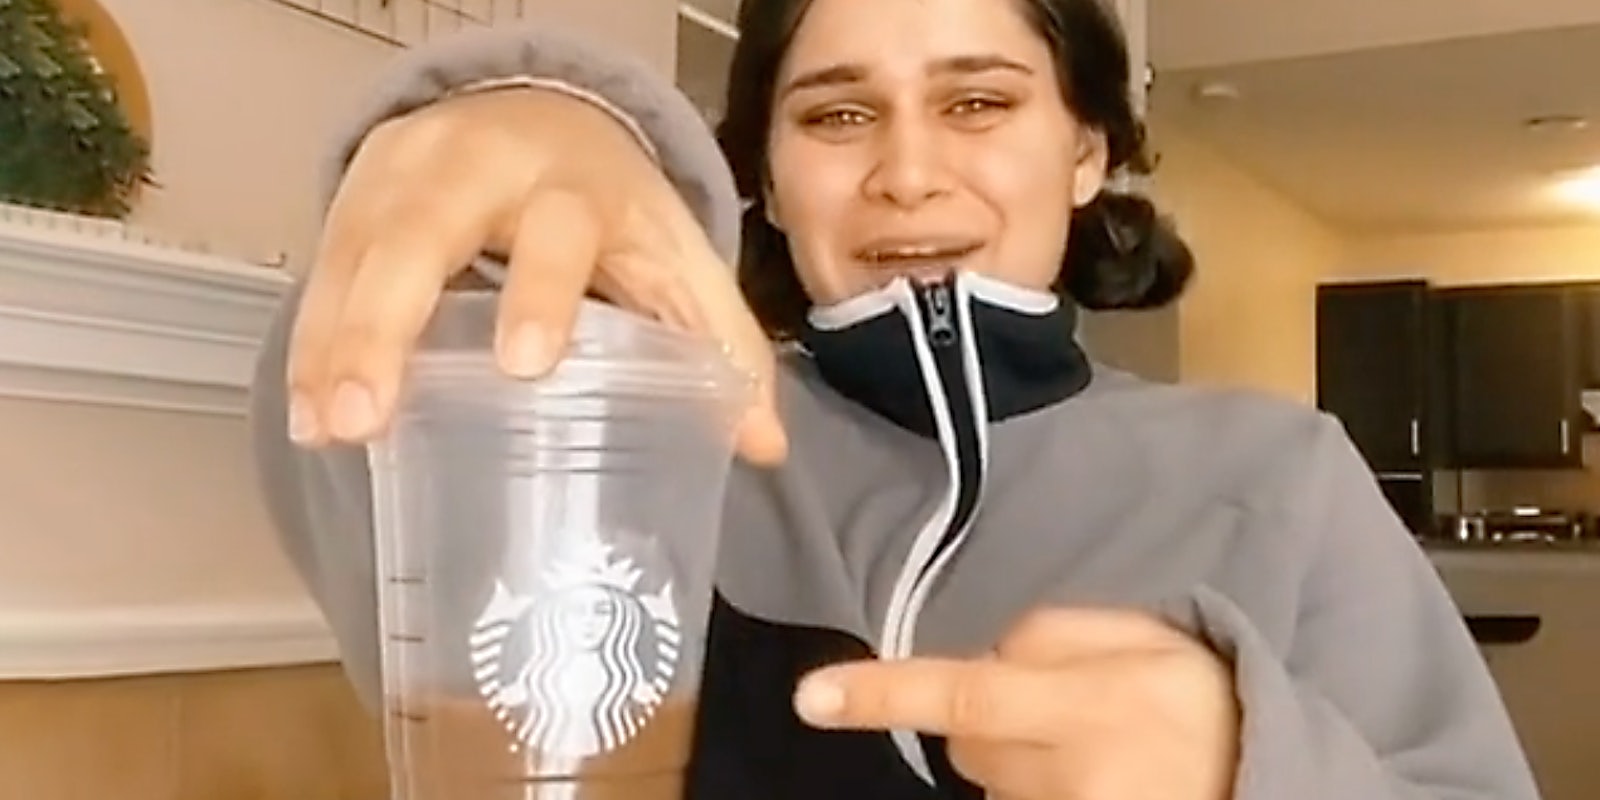 A person pointing at a Starbucks cup.